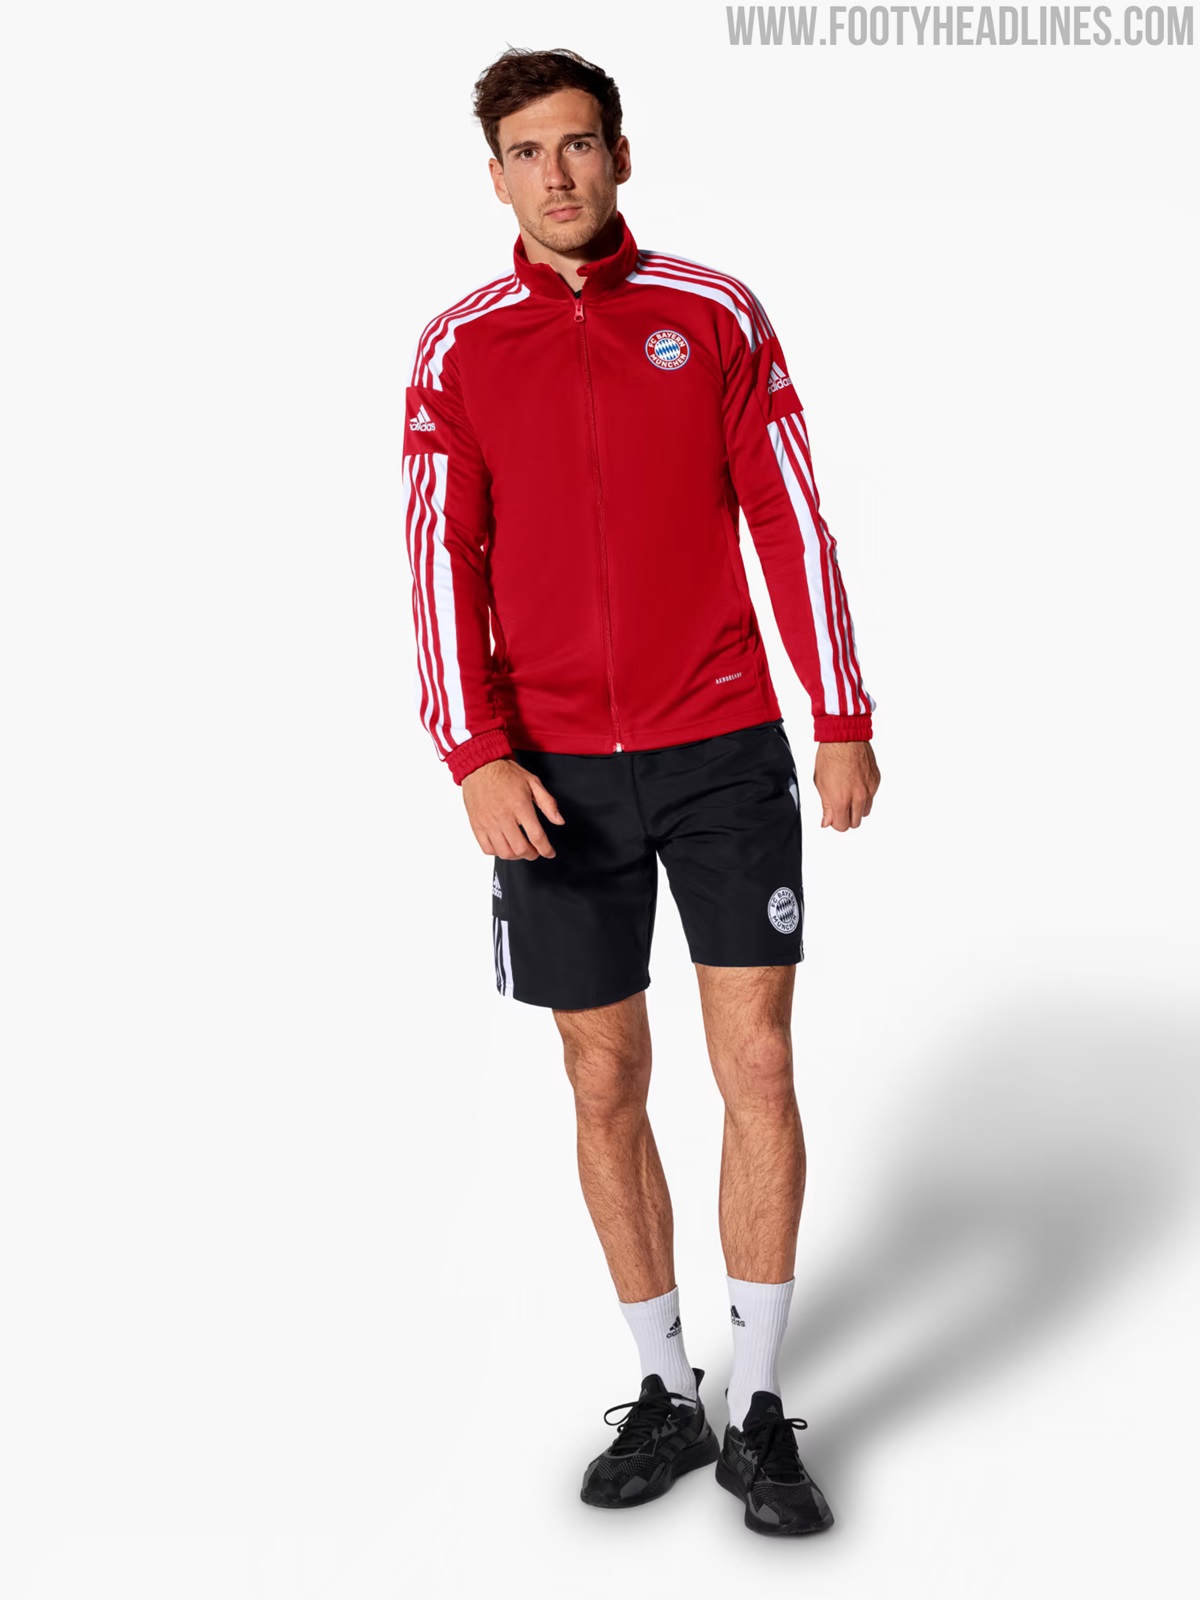 Made In House By The Club: Adidas Bayern München 2022 Training Kit +  Collection Released - Footy Headlines